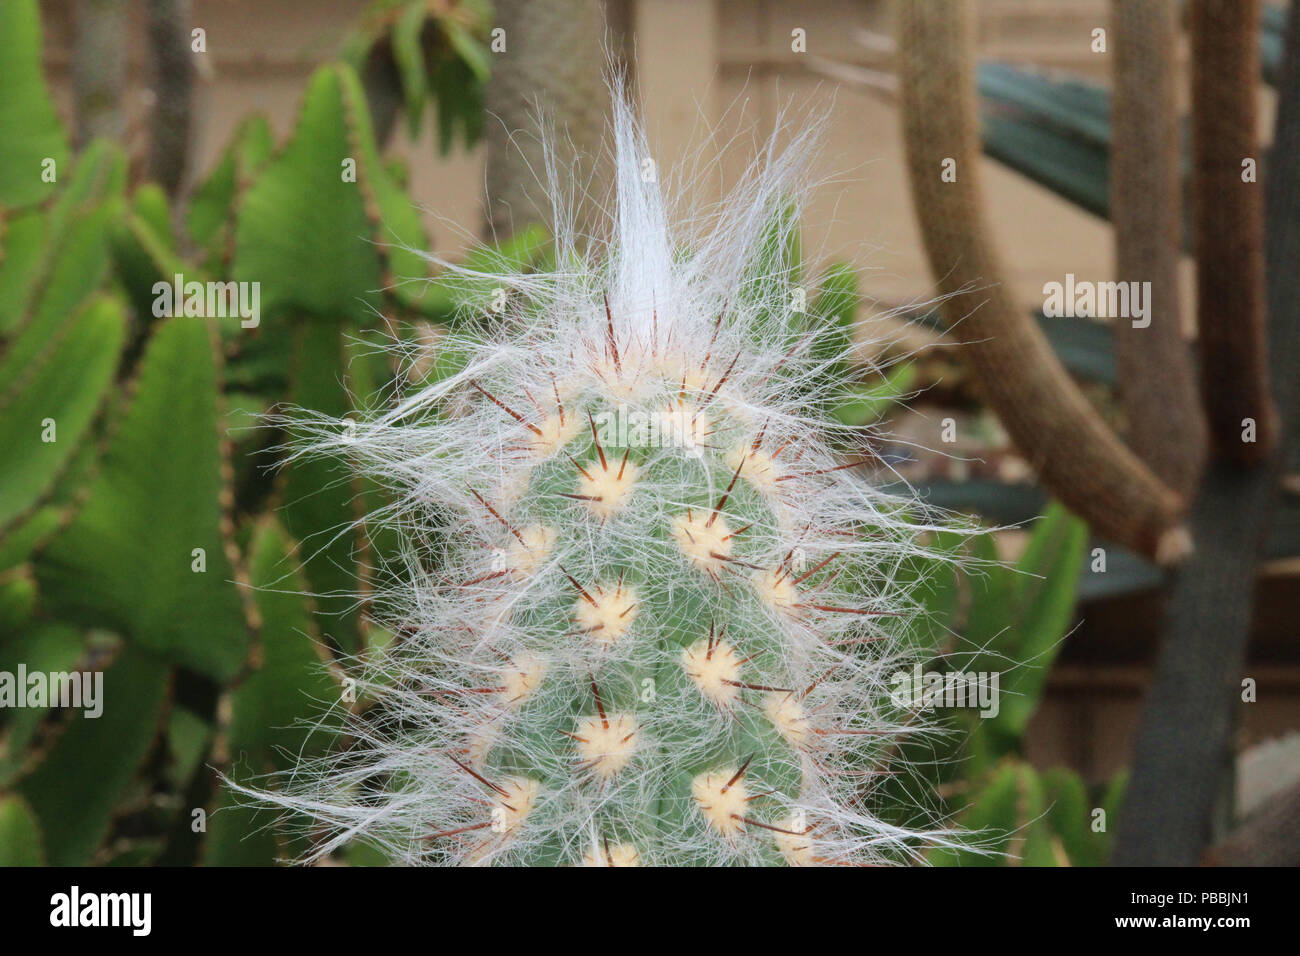 Close up of the top of an Oreocereus Cacti covered in woolly white fuzz and spines Stock Photo